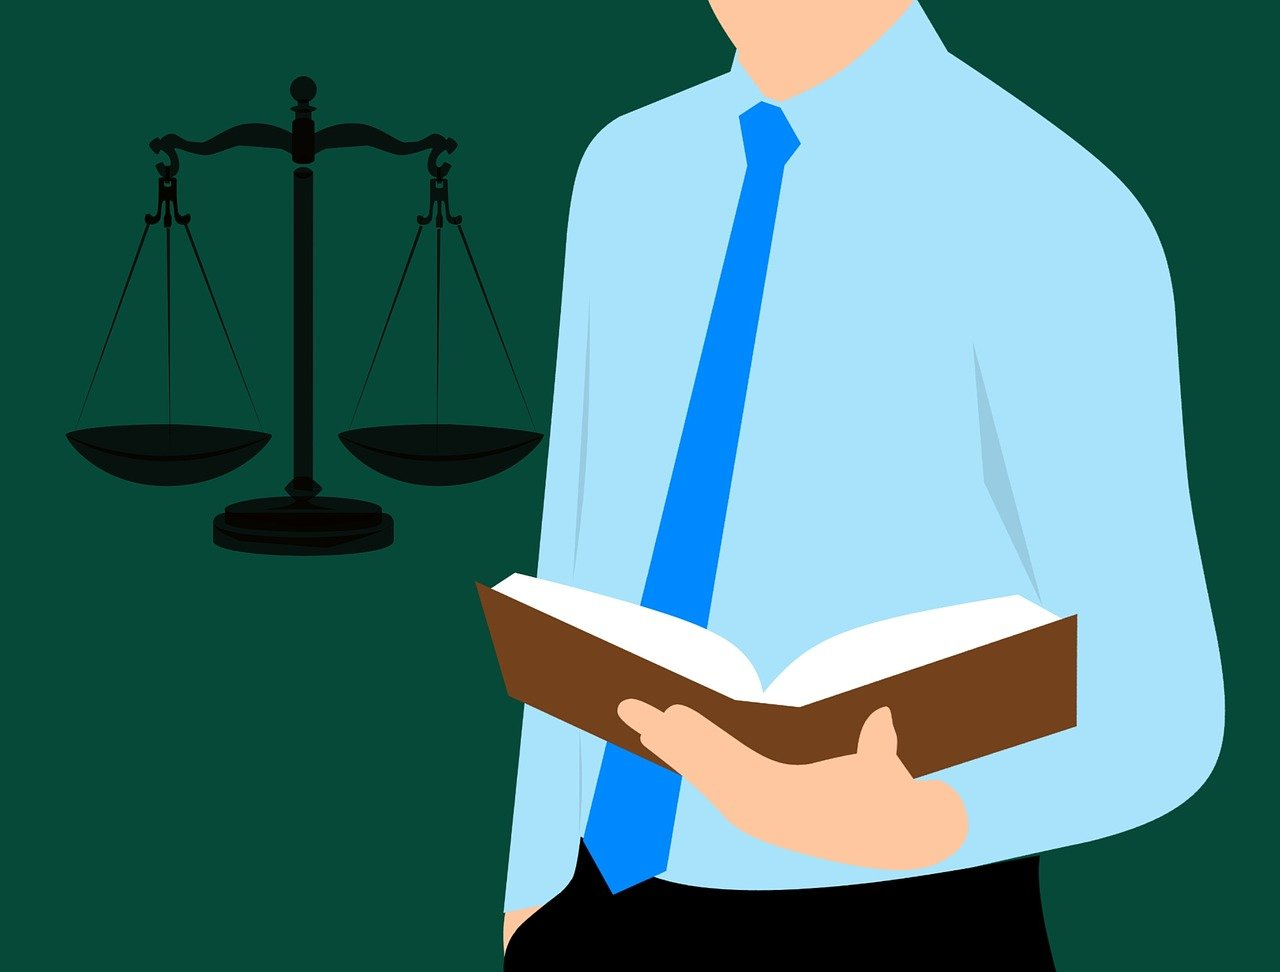 An illustration of a lawyer